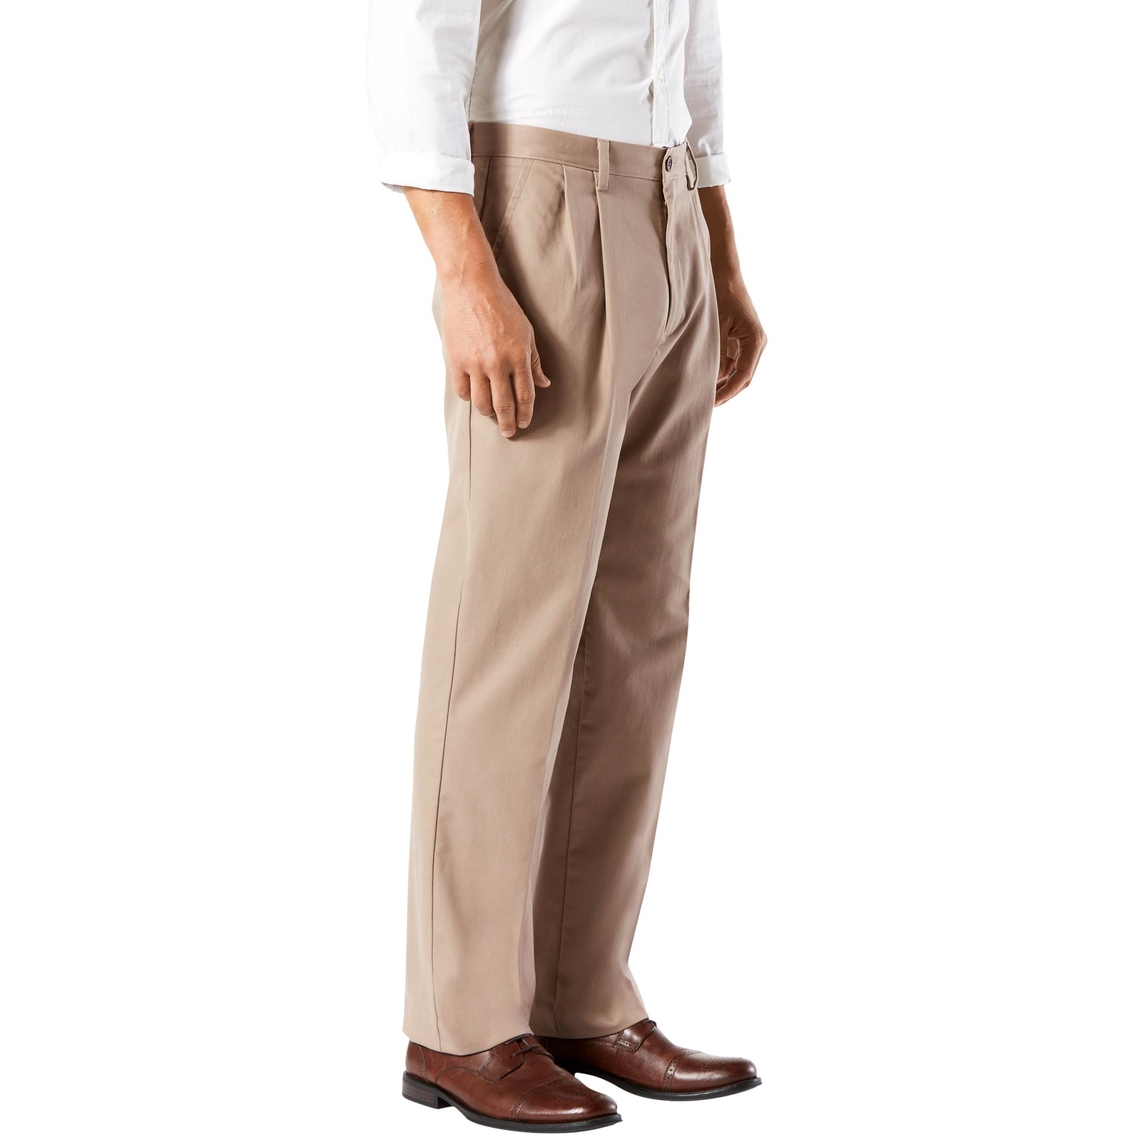 Dockers Easy Care Classic Fit Pleated Khaki Pants - Image 3 of 3